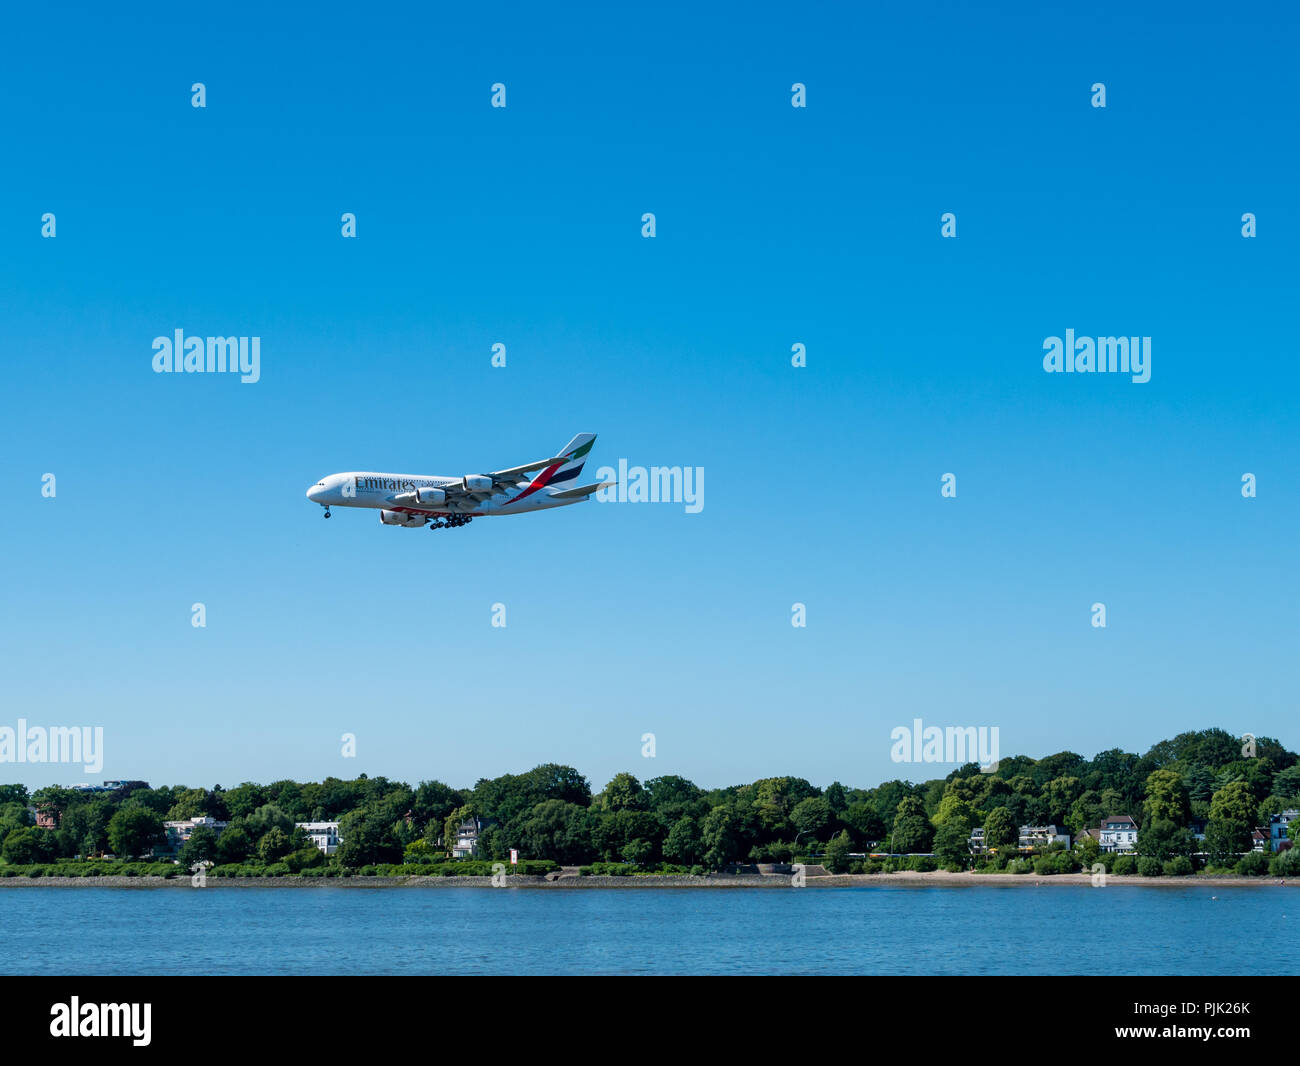 Hamburg, Germany - July 07, 2018: Airbus 380 in low level flight for landing approach at Airbus Industries at sunny day in Hamburg, Germany. Stock Photo